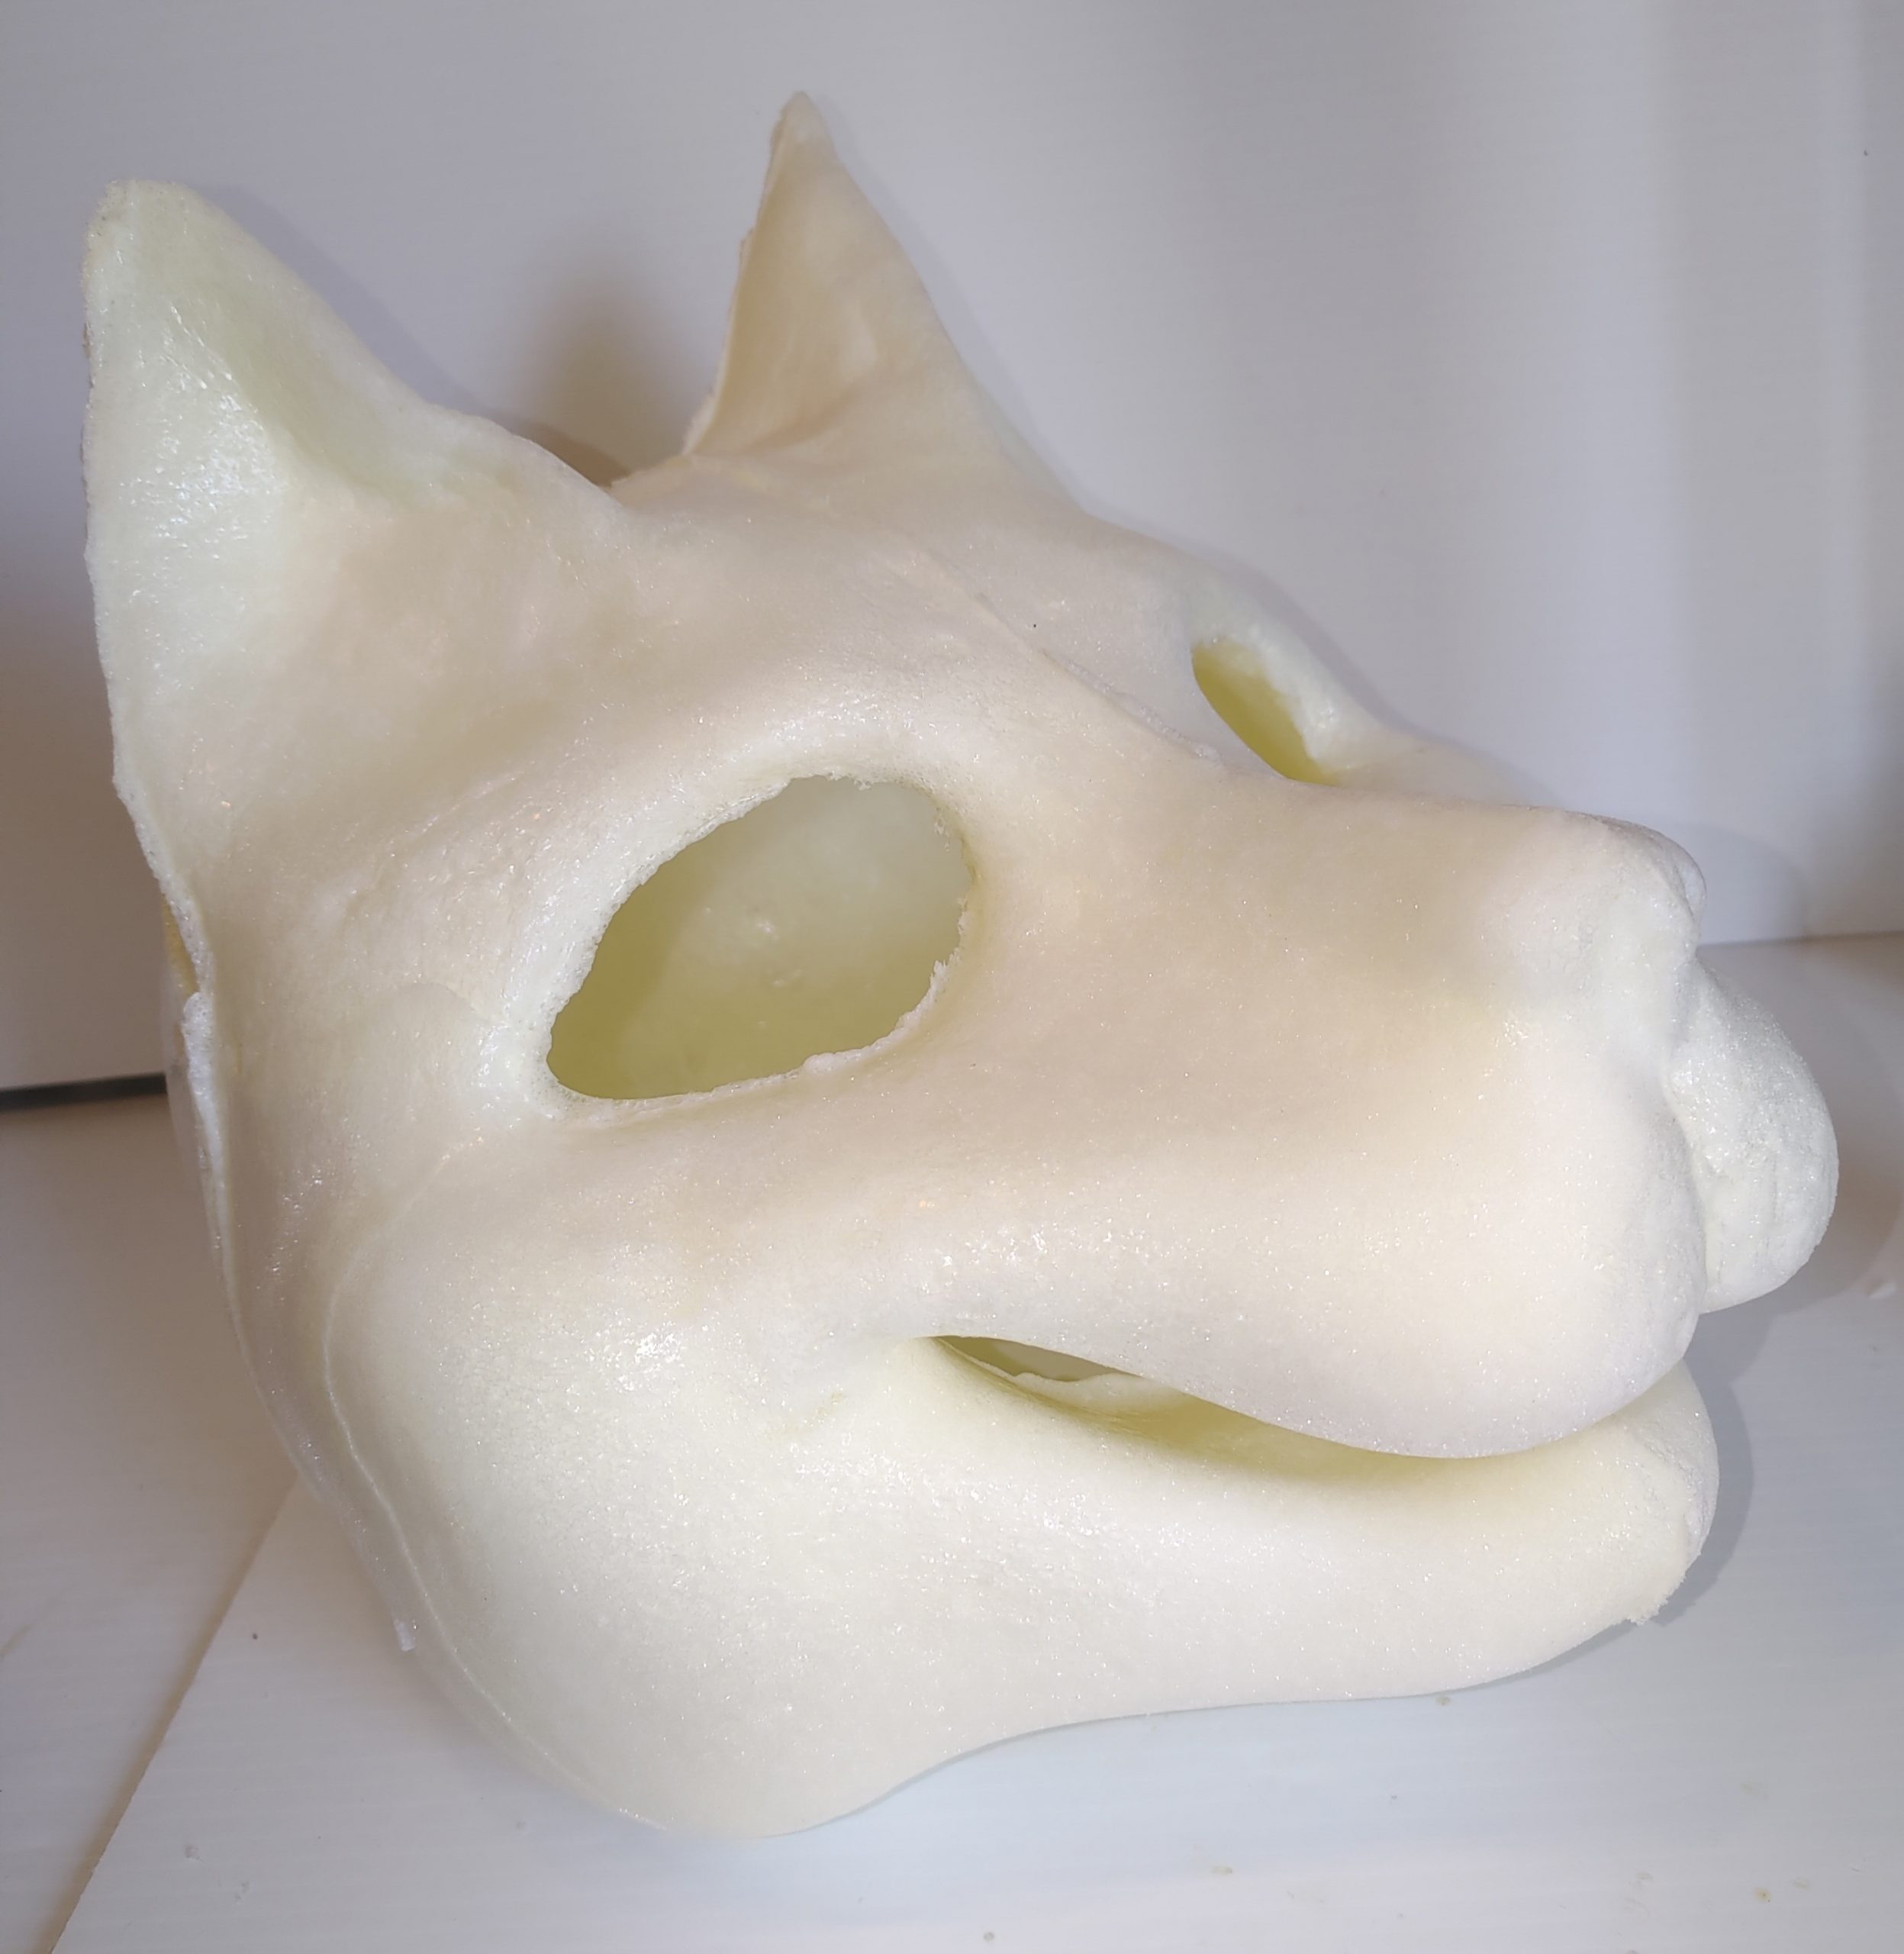 Ben the Bear, Furry Fursuit Foam Full Head Base for Fursuiting, For Furries  and Cosplay - DIY - fhb17